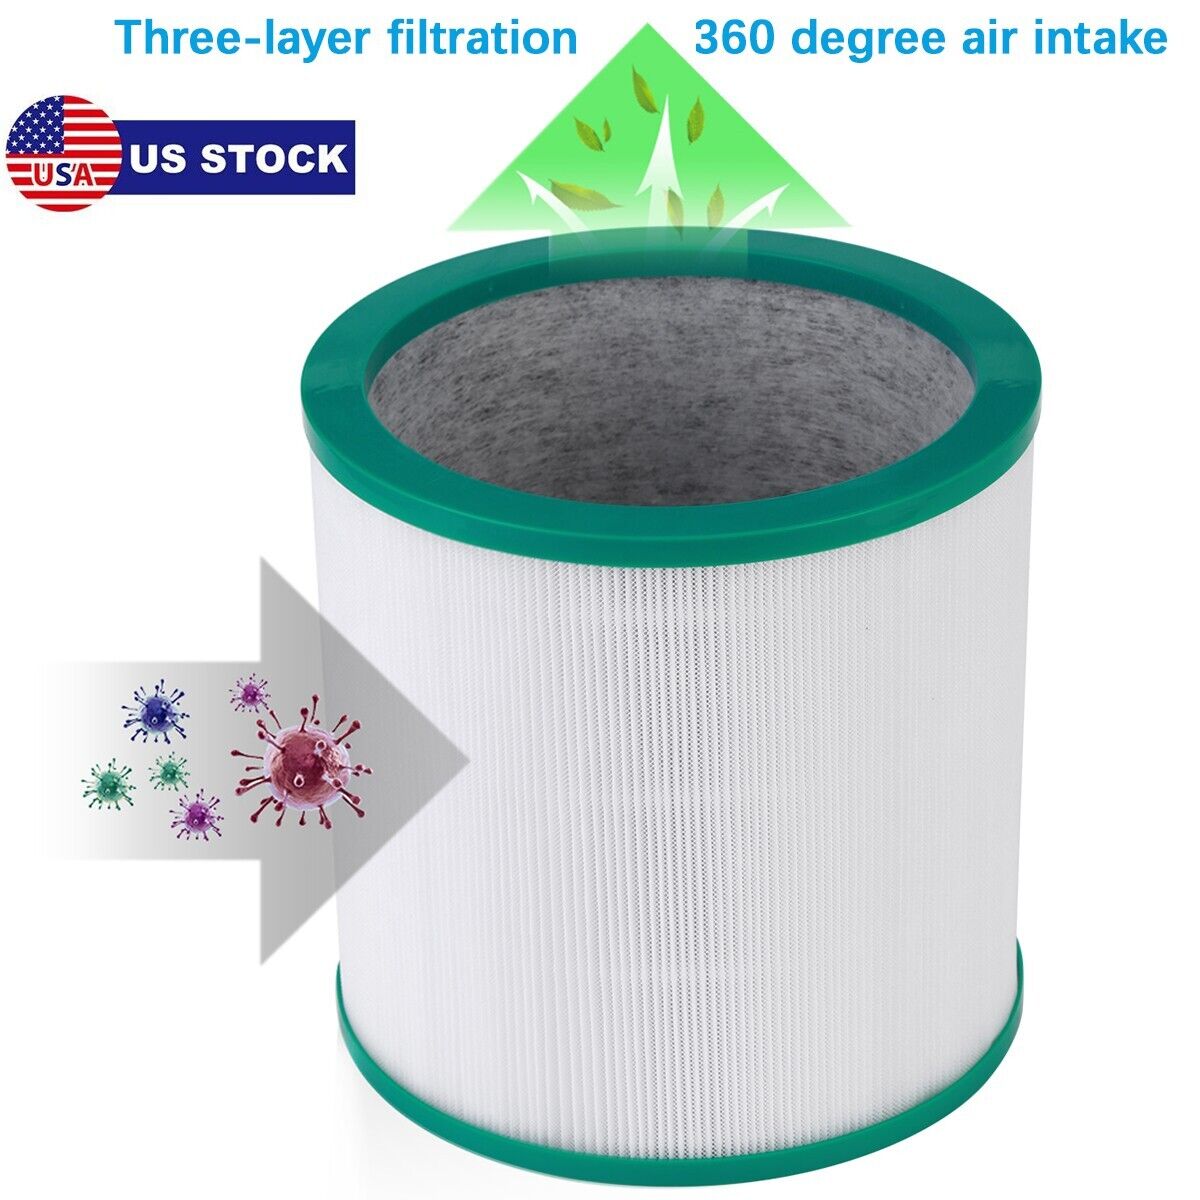 Replacement Filter for Dyson Tower Fan Air Purifier TP01 TP02 TP03 AM11 BP01 US